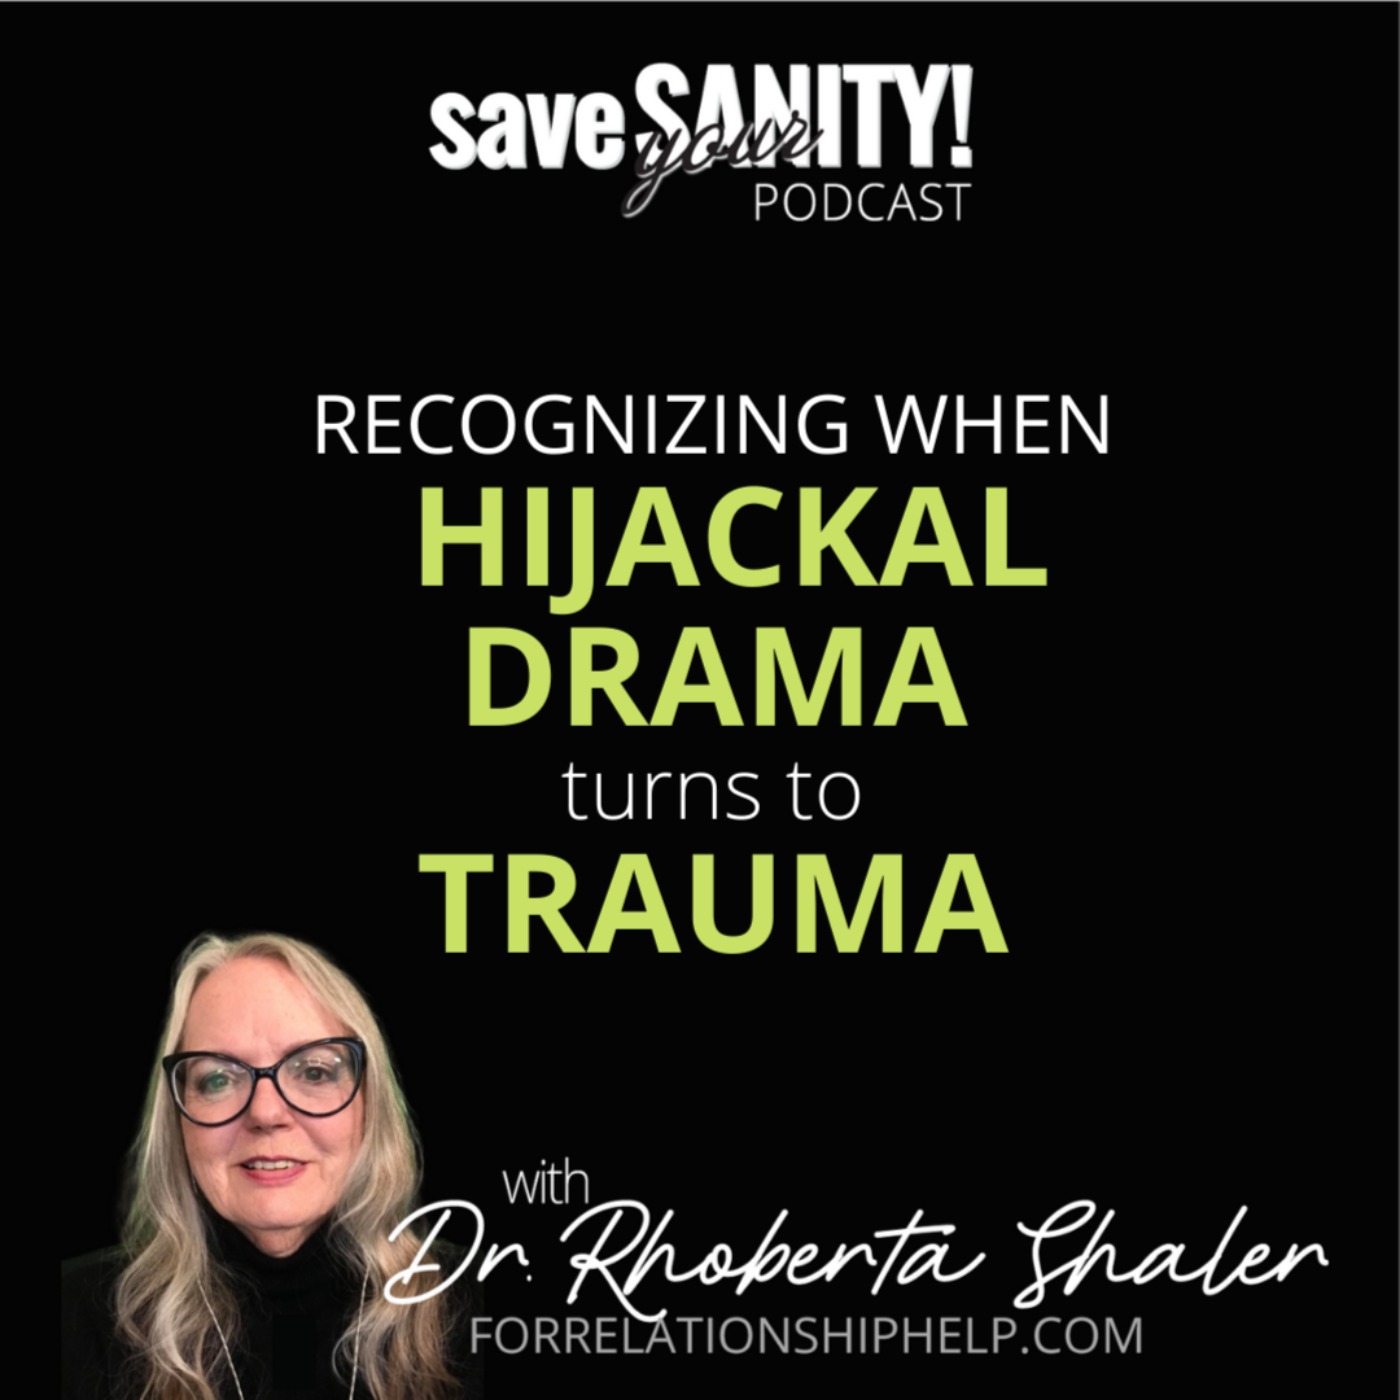 How to Recognize When Hijackal Drama Turns to Trauma